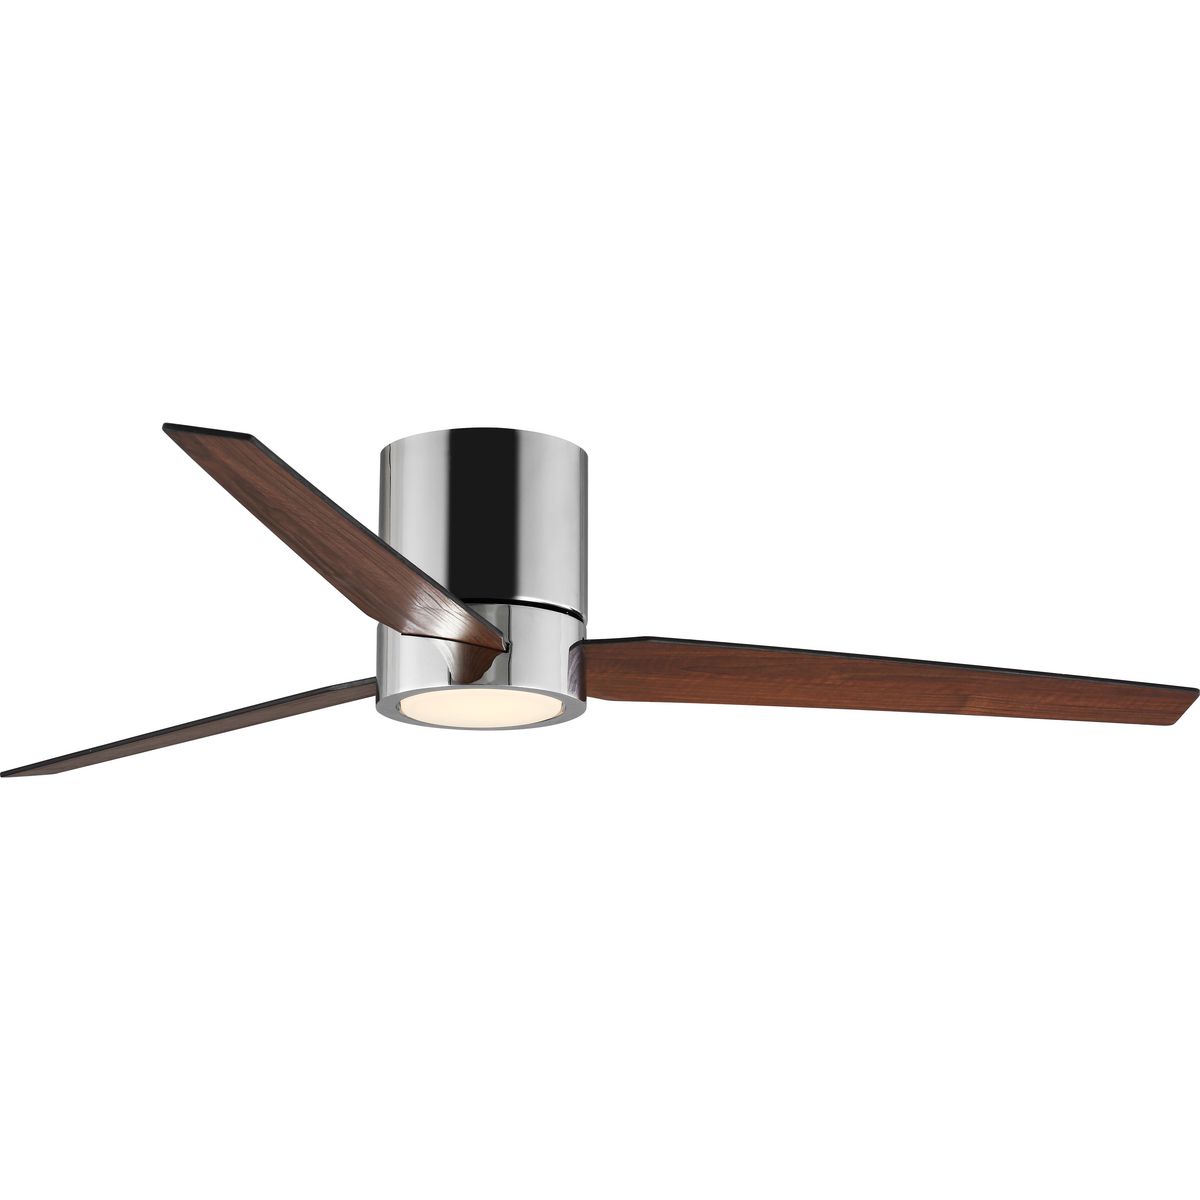 This Braden 56 inch, three-blade, hugger-style ceiling fan features clean lines and a design that complements modern interiors. A shatterproof white opal glass shade contains an integrated 18W LED module, offering both form and function with energy and cost-savings benefits. Featuring a larger motor, Braden moves more air than a traditional hugger ceiling fan. A full function remote with batteries is included. Polished Chrome finish.